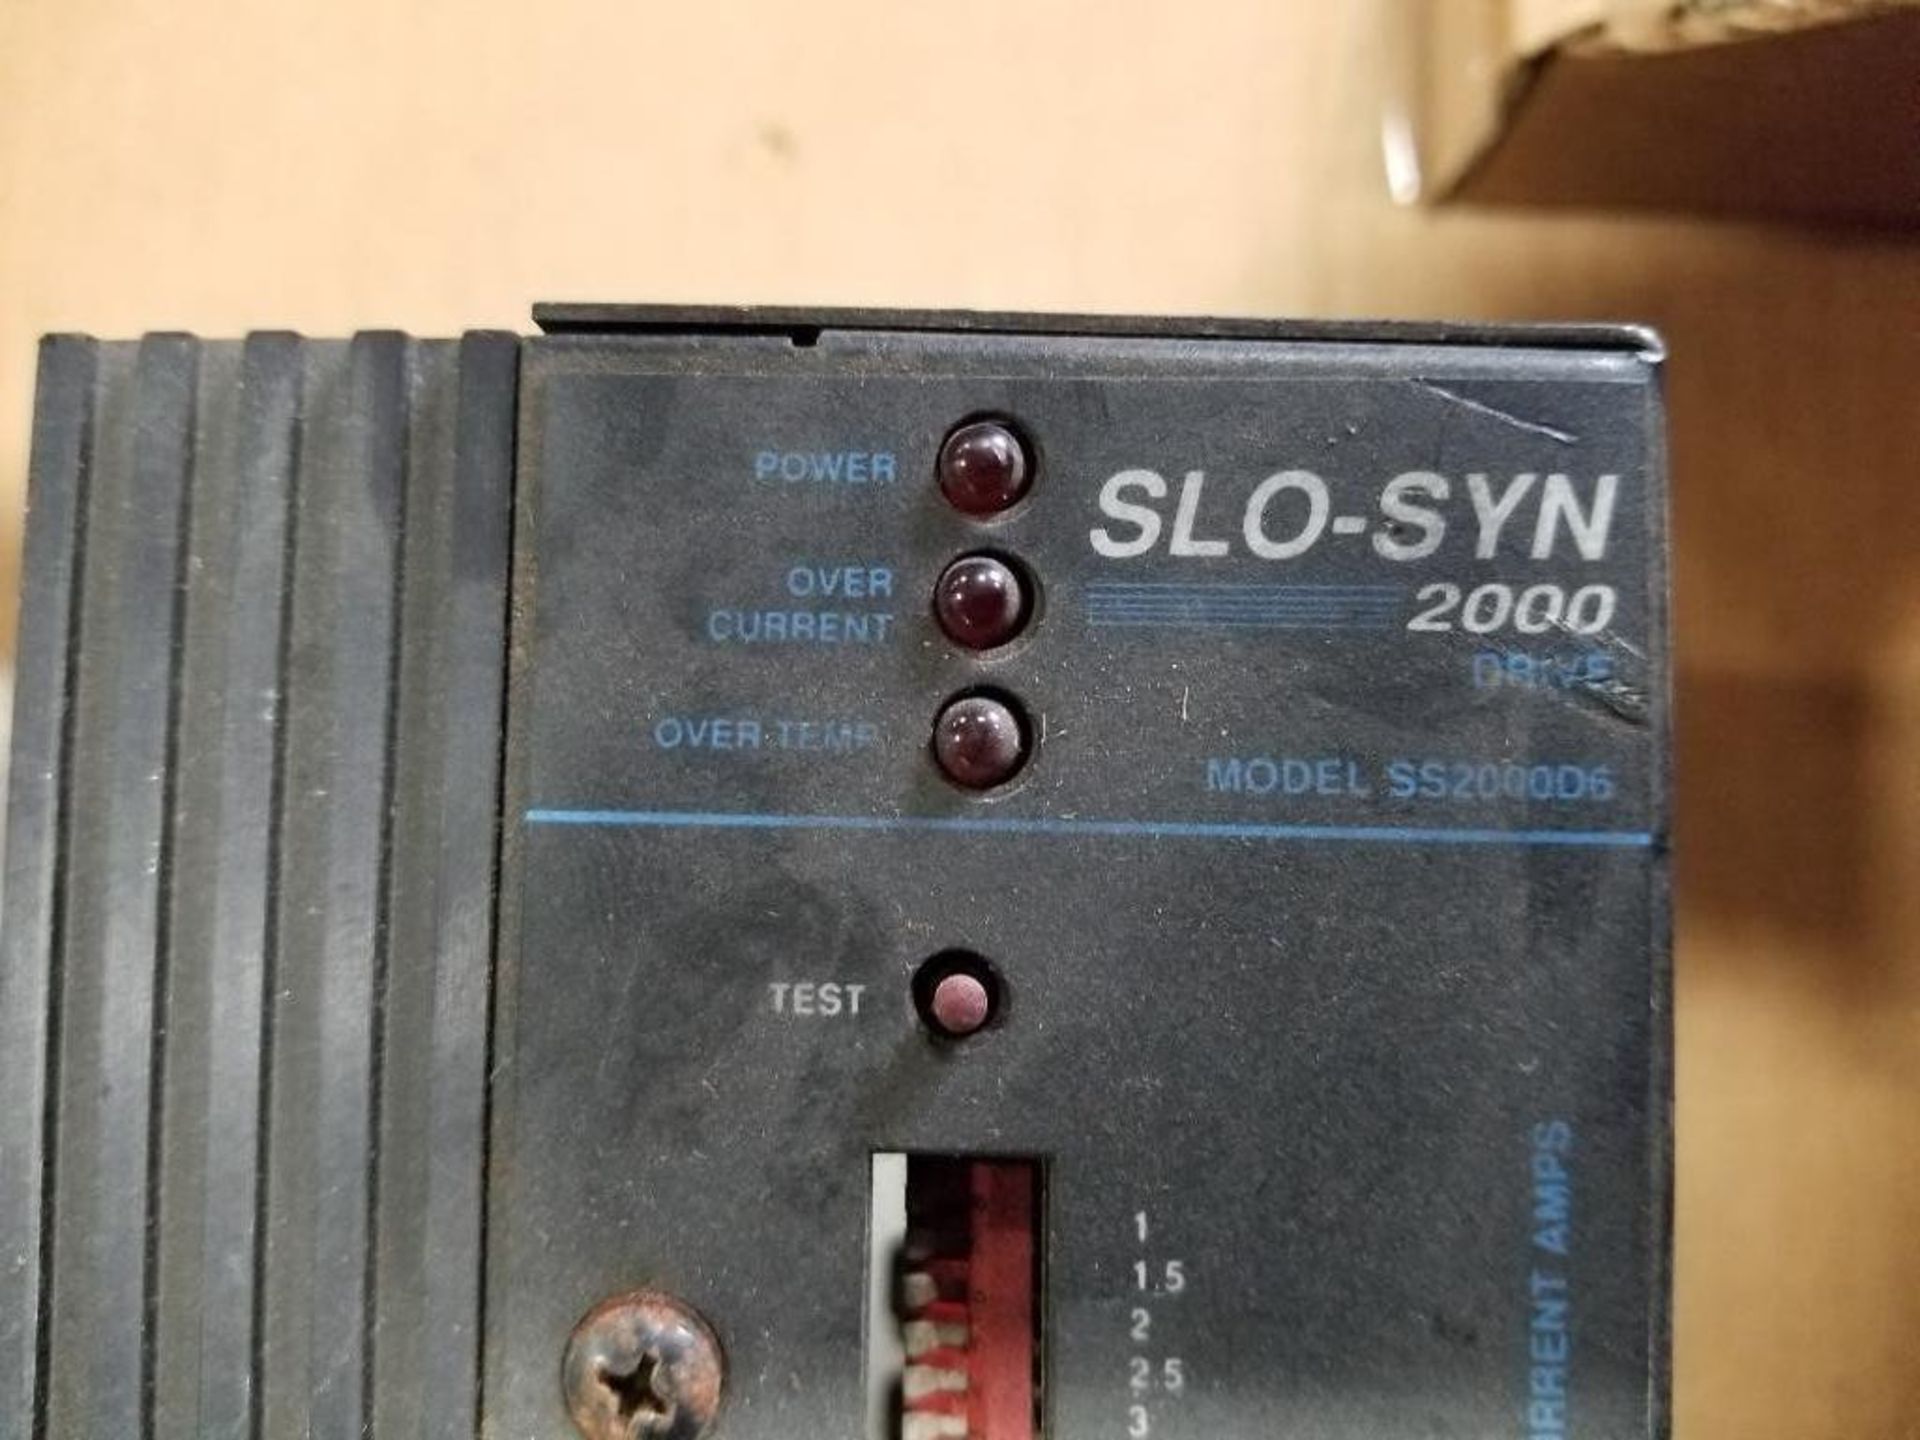 Superior Electric Slo-Syn 2000 motor drive. Model SS2000D6. - Image 2 of 3